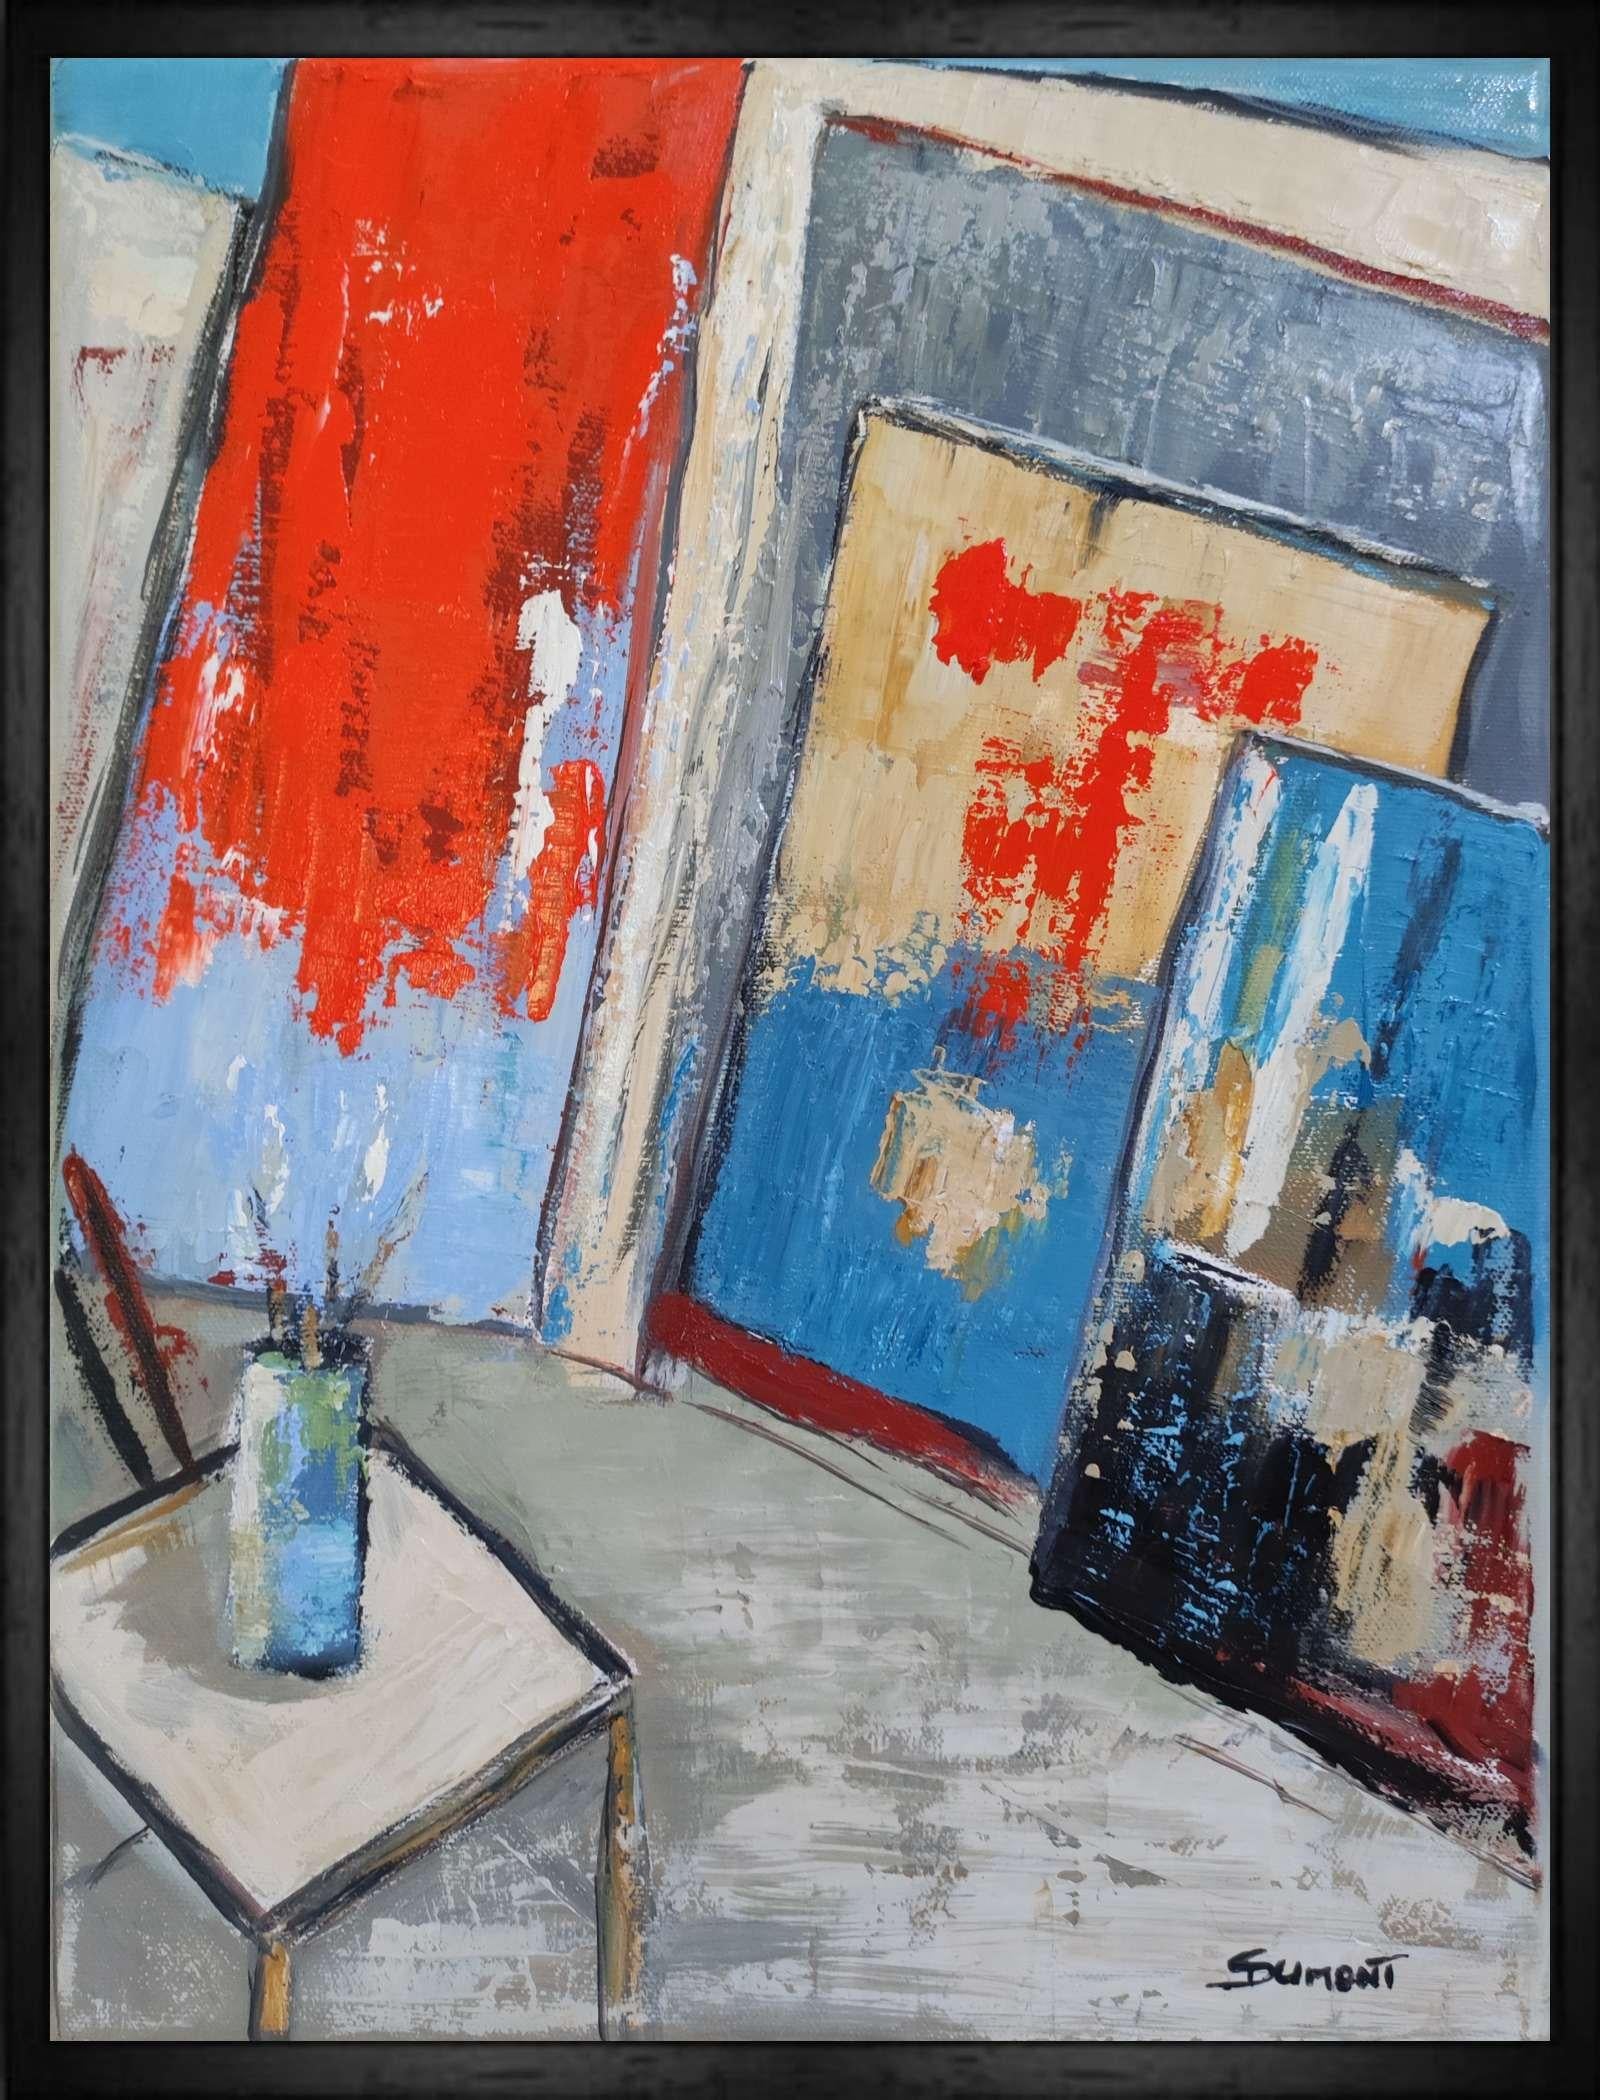 SOPHIE DUMONT Abstract Painting - My studio, red abstract; expressionism, geometric, texture, oil on linen canvas